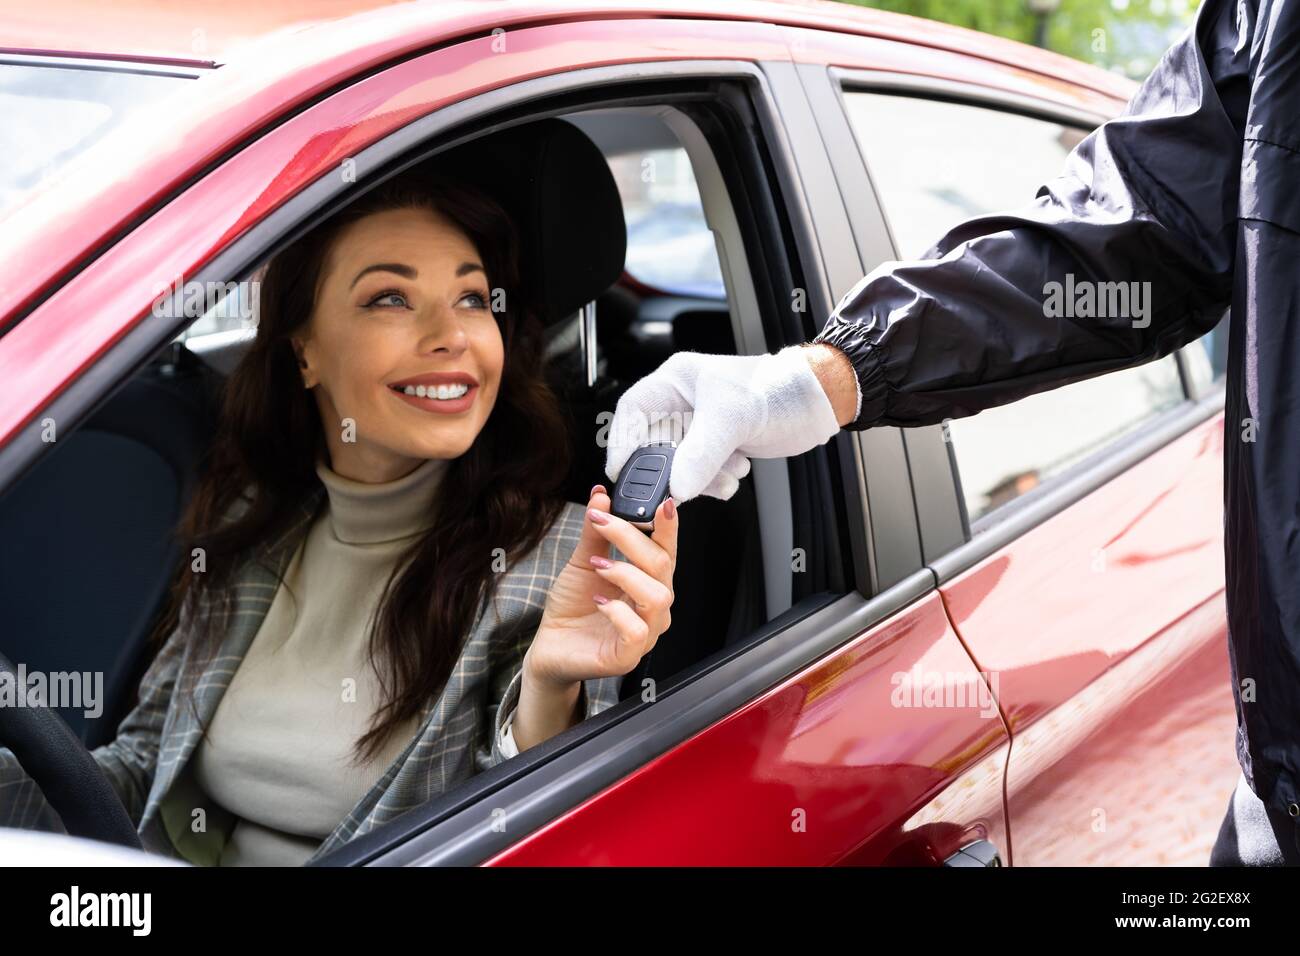 Valet Parking Giving Car Key To Young Woman Stock Photo